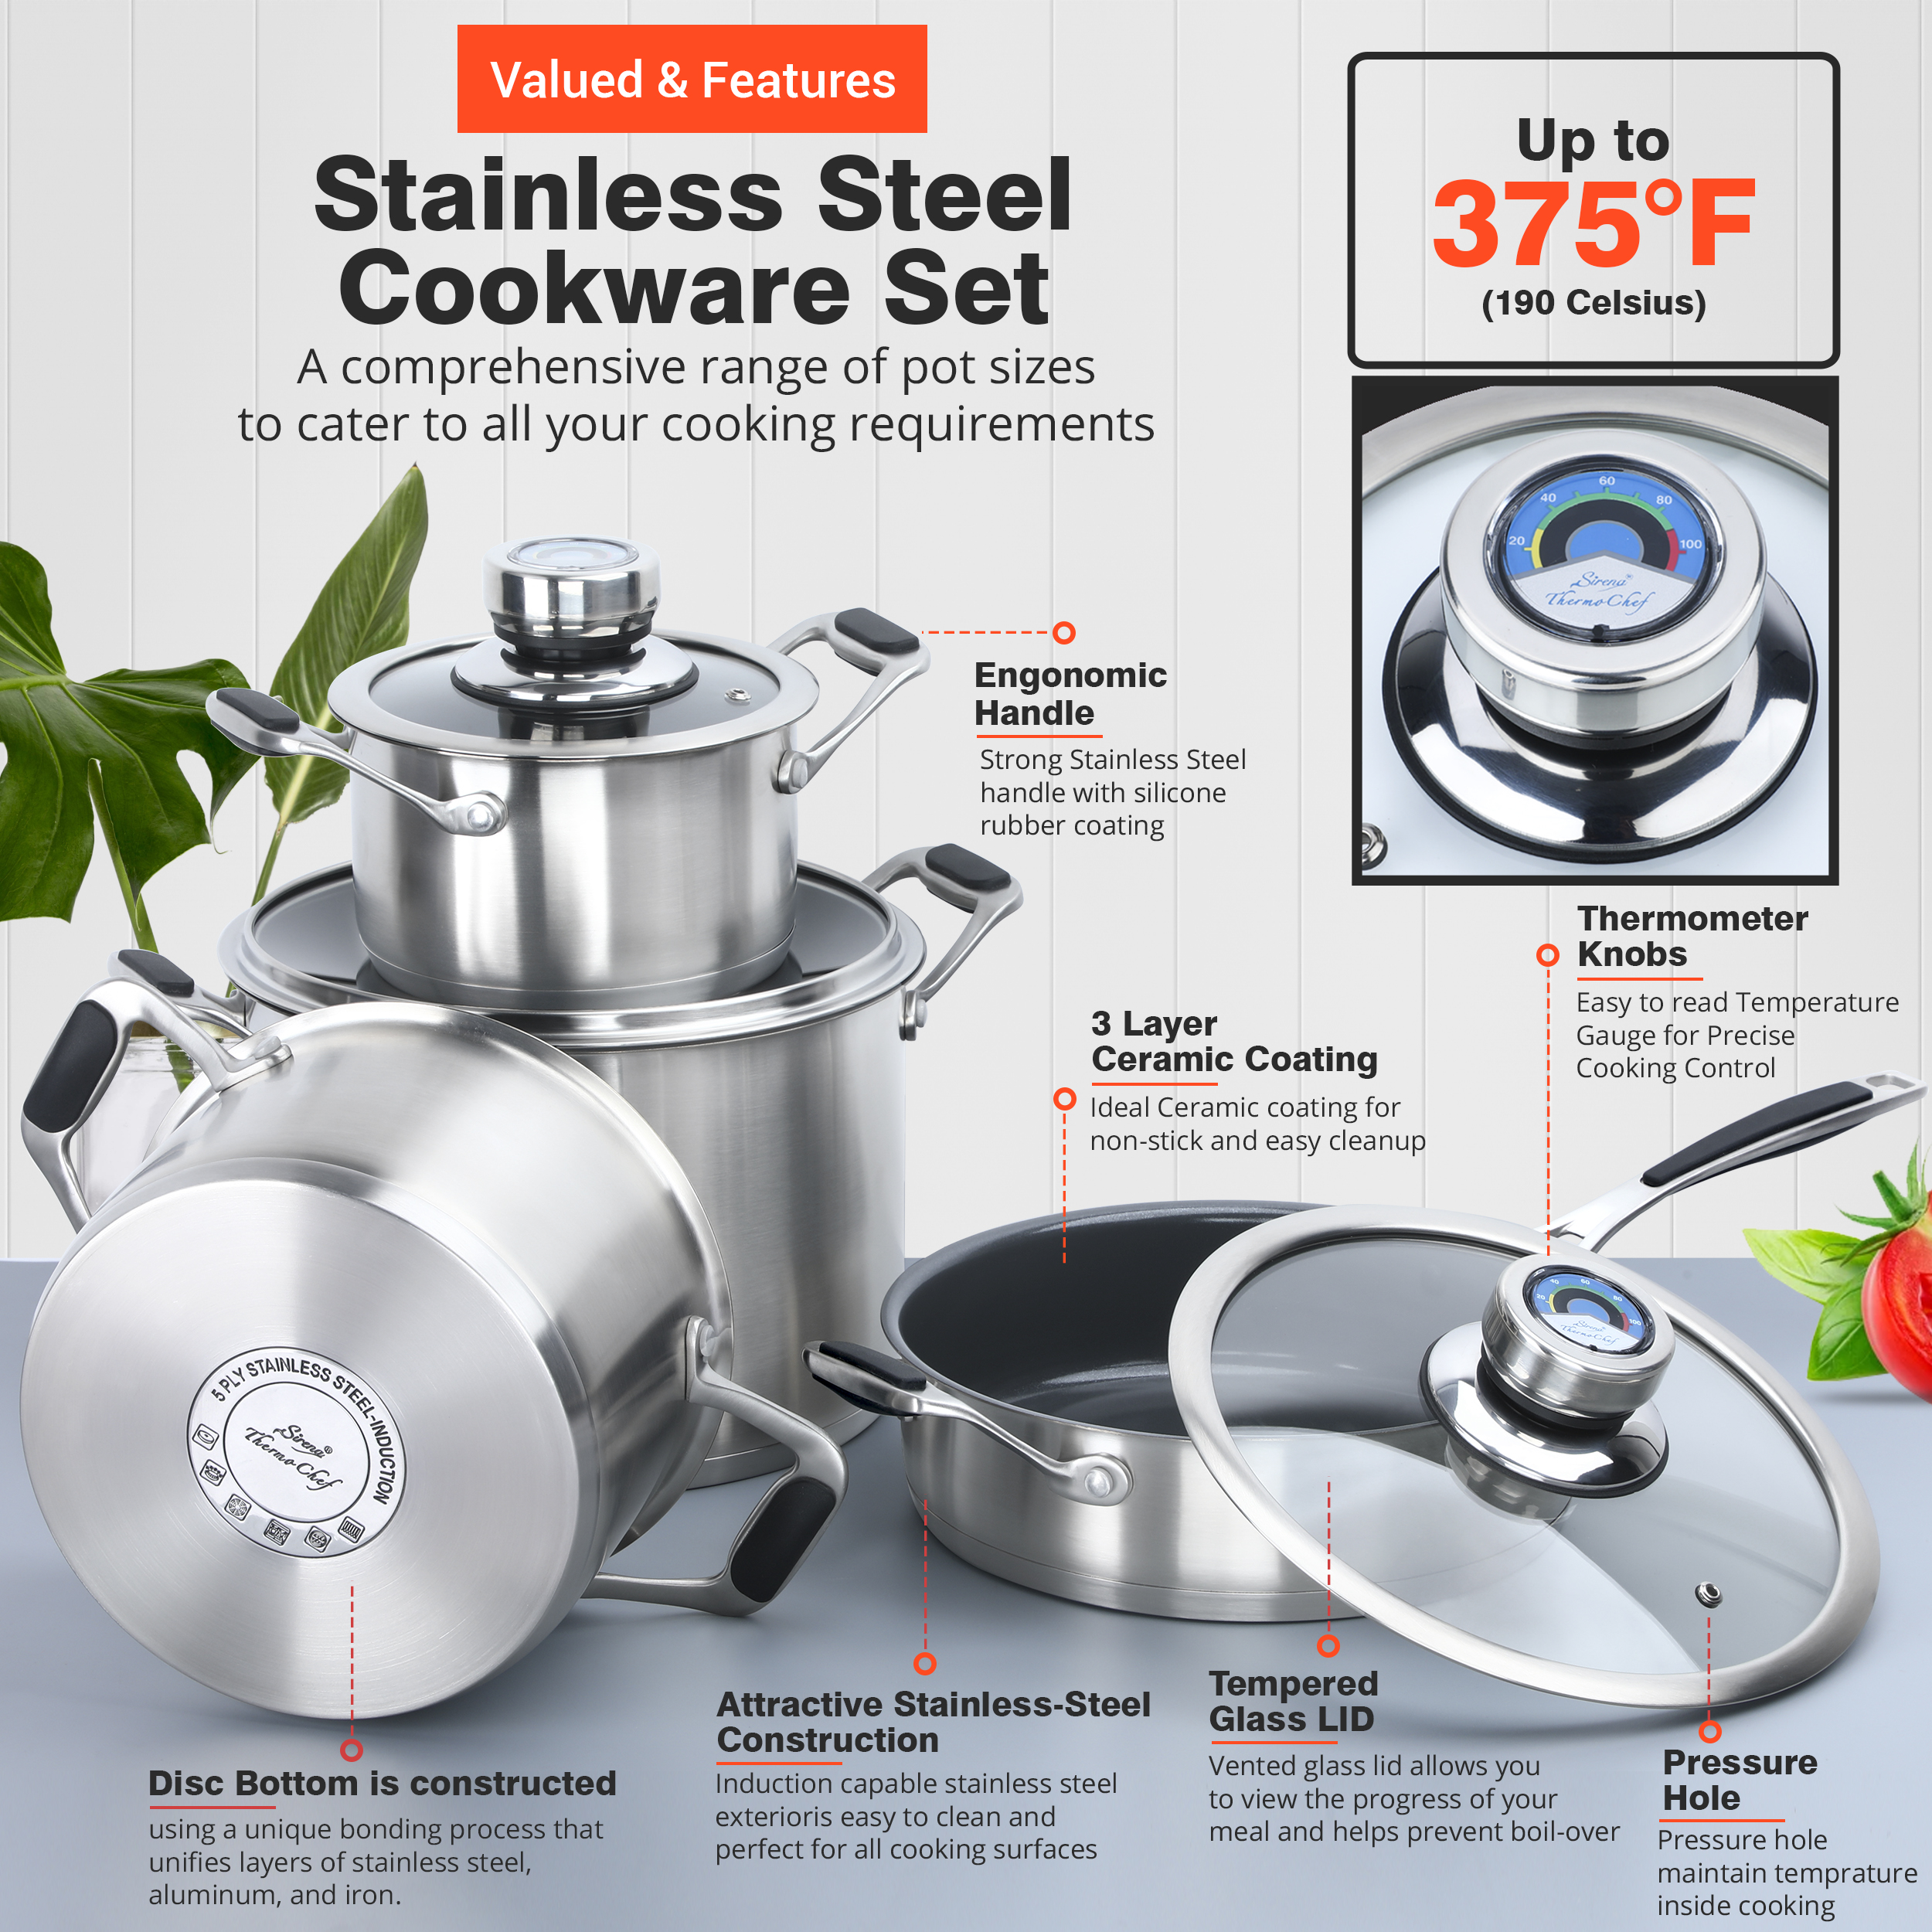 Sirena ThermoChef, Cookware Set